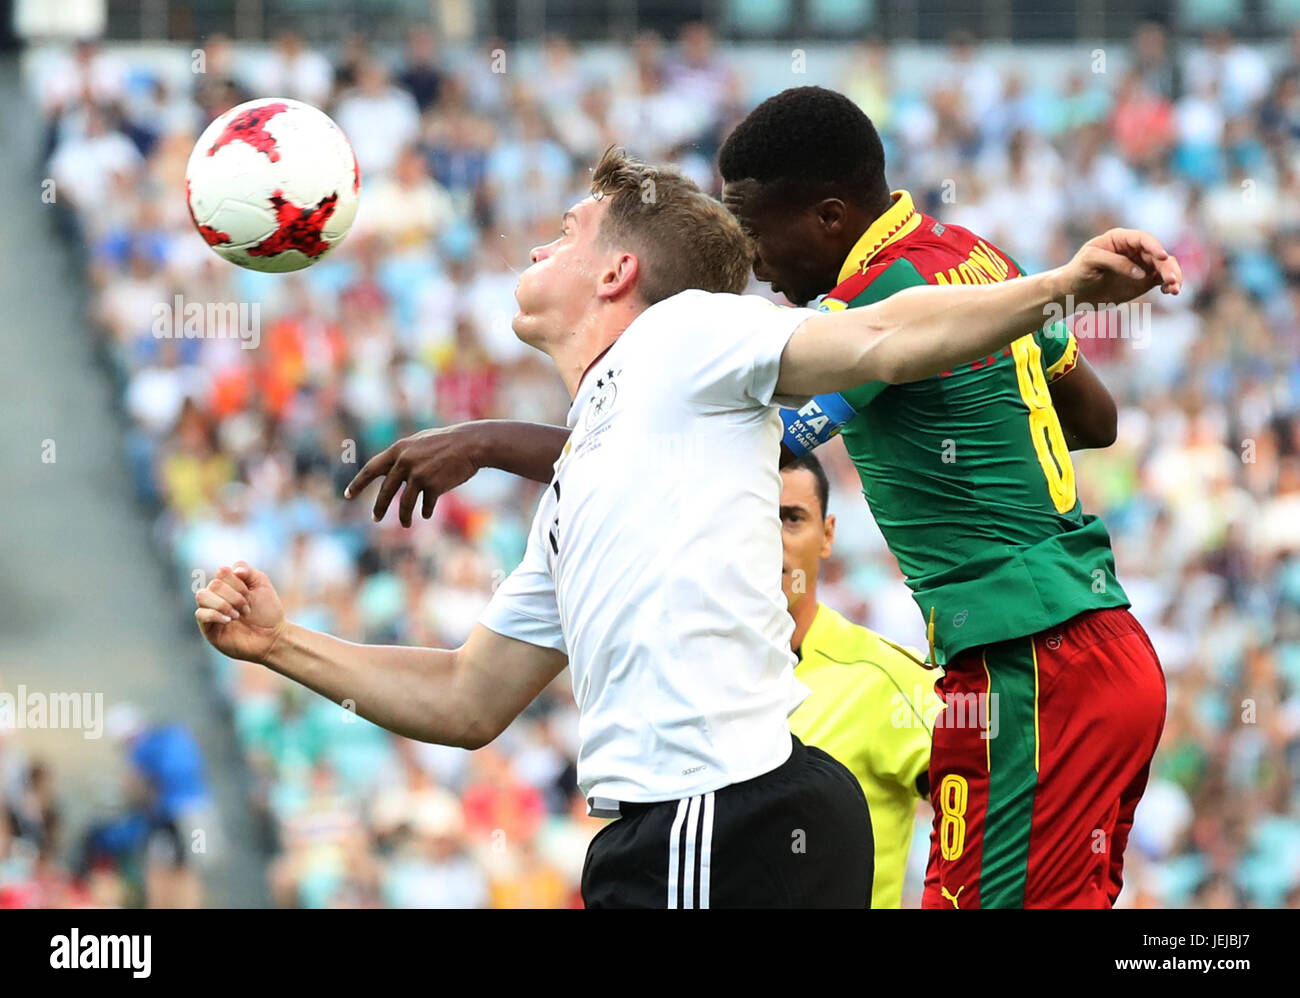 Sochi, Russia. 25th June, 2017. Matthias Ginter (L) of Germany heads the ball with Benjamin Moukandjo of Cameroon during the group B match between Germany and Cameroon of the 2017 FIFA Confederations Cup in Sochi, Russia, on June 25, 2017. Germany won 3-1. Credit: Xu Zijian/Xinhua/Alamy Live News Stock Photo